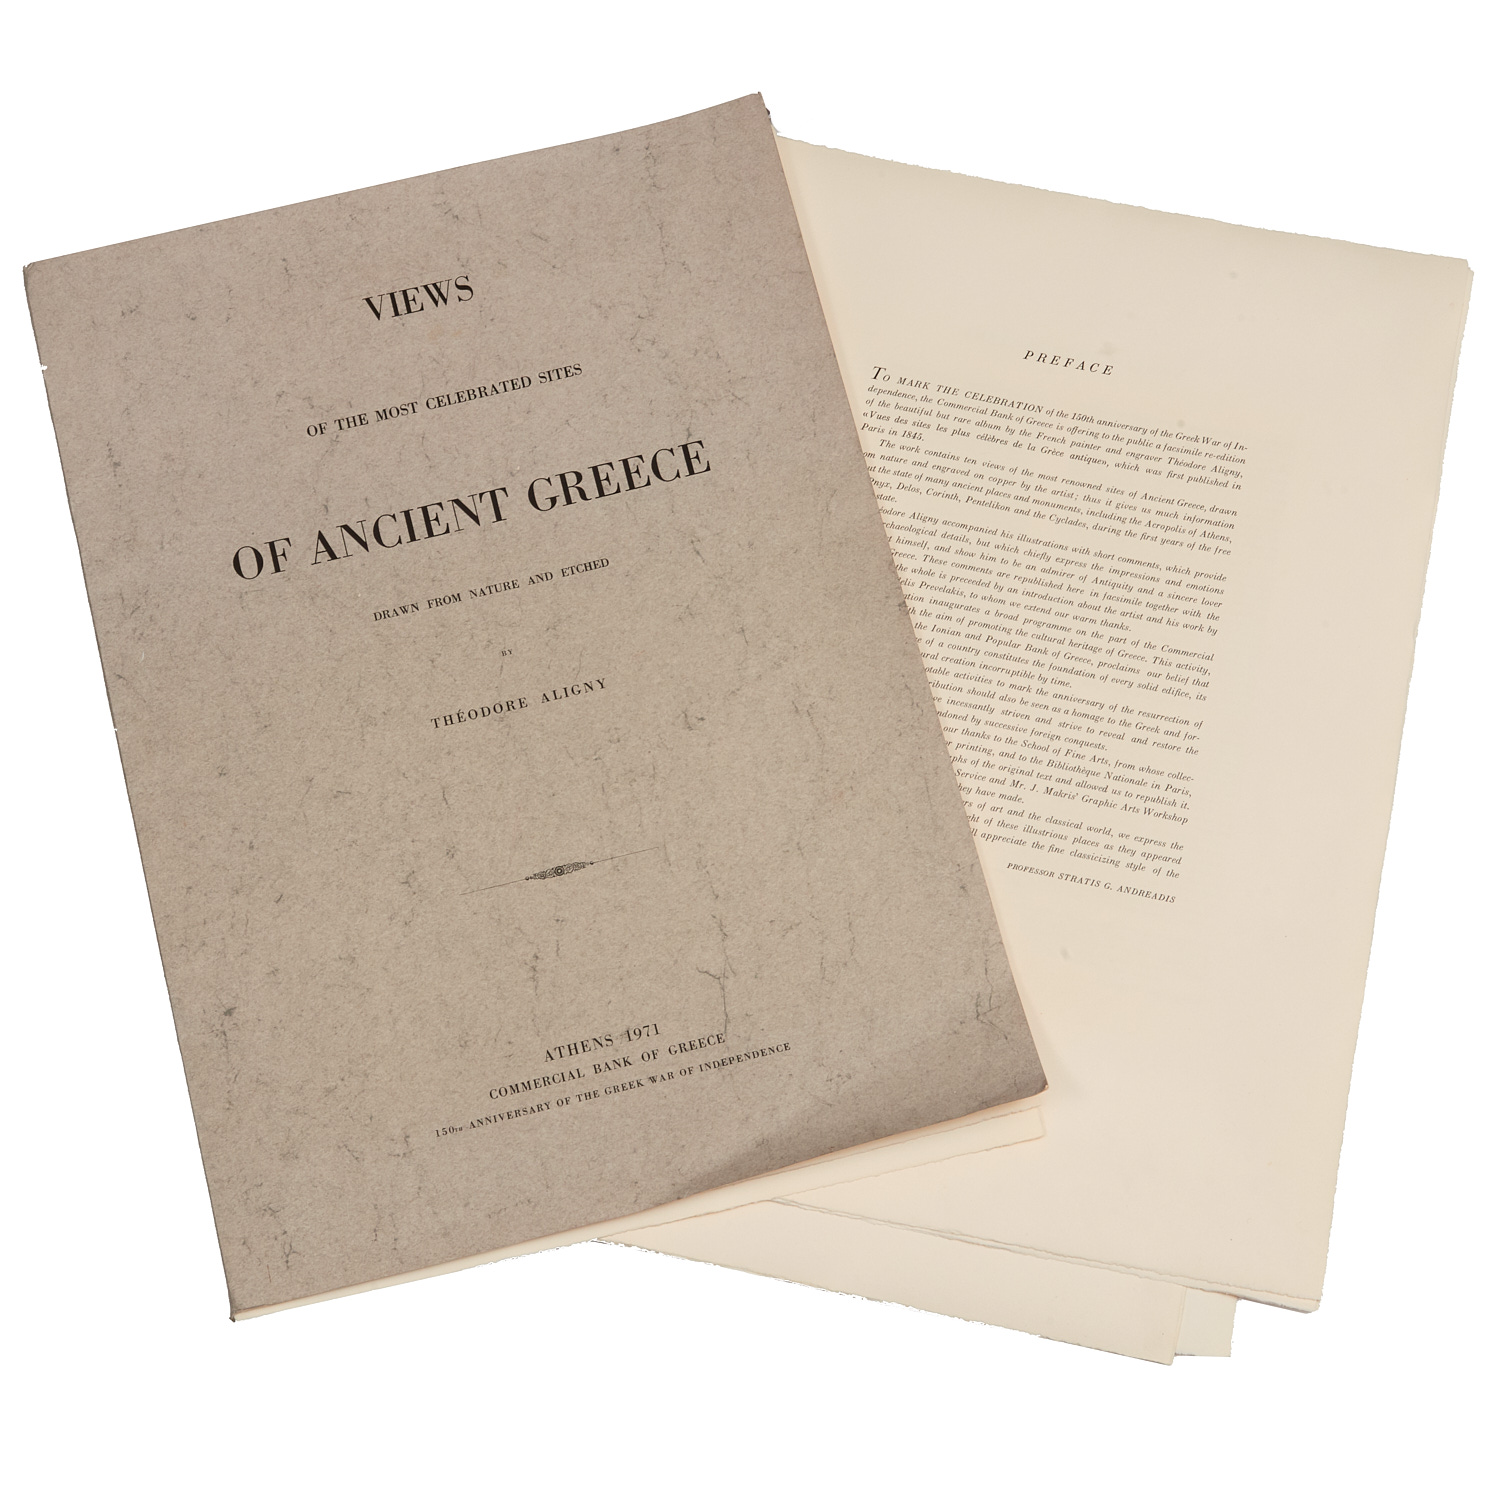 THEODORE ALIGNY, VIEWS OF ANCIENT